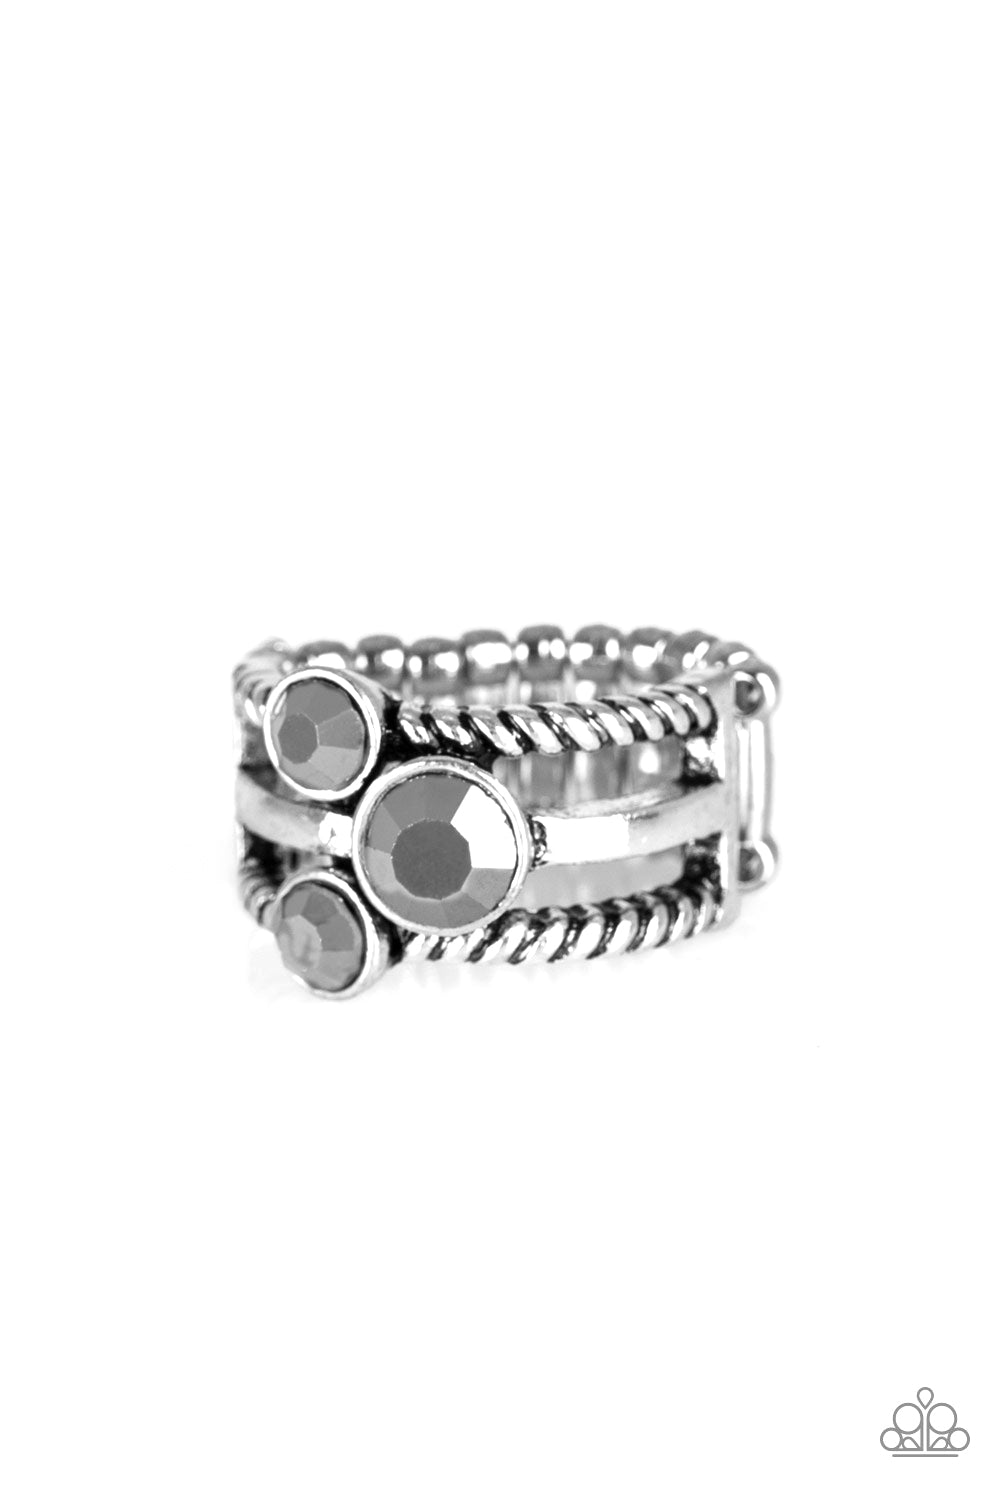 Head In The Stars - Silver - Hematite Ring - Paparazzi Accessories - A trio of glittery hematite rhinestones are sprinkled along smooth and twisted silver bands, creating edgy layers across the finger. Features a stretchy band for a flexible fit. Sold as one individual ring.